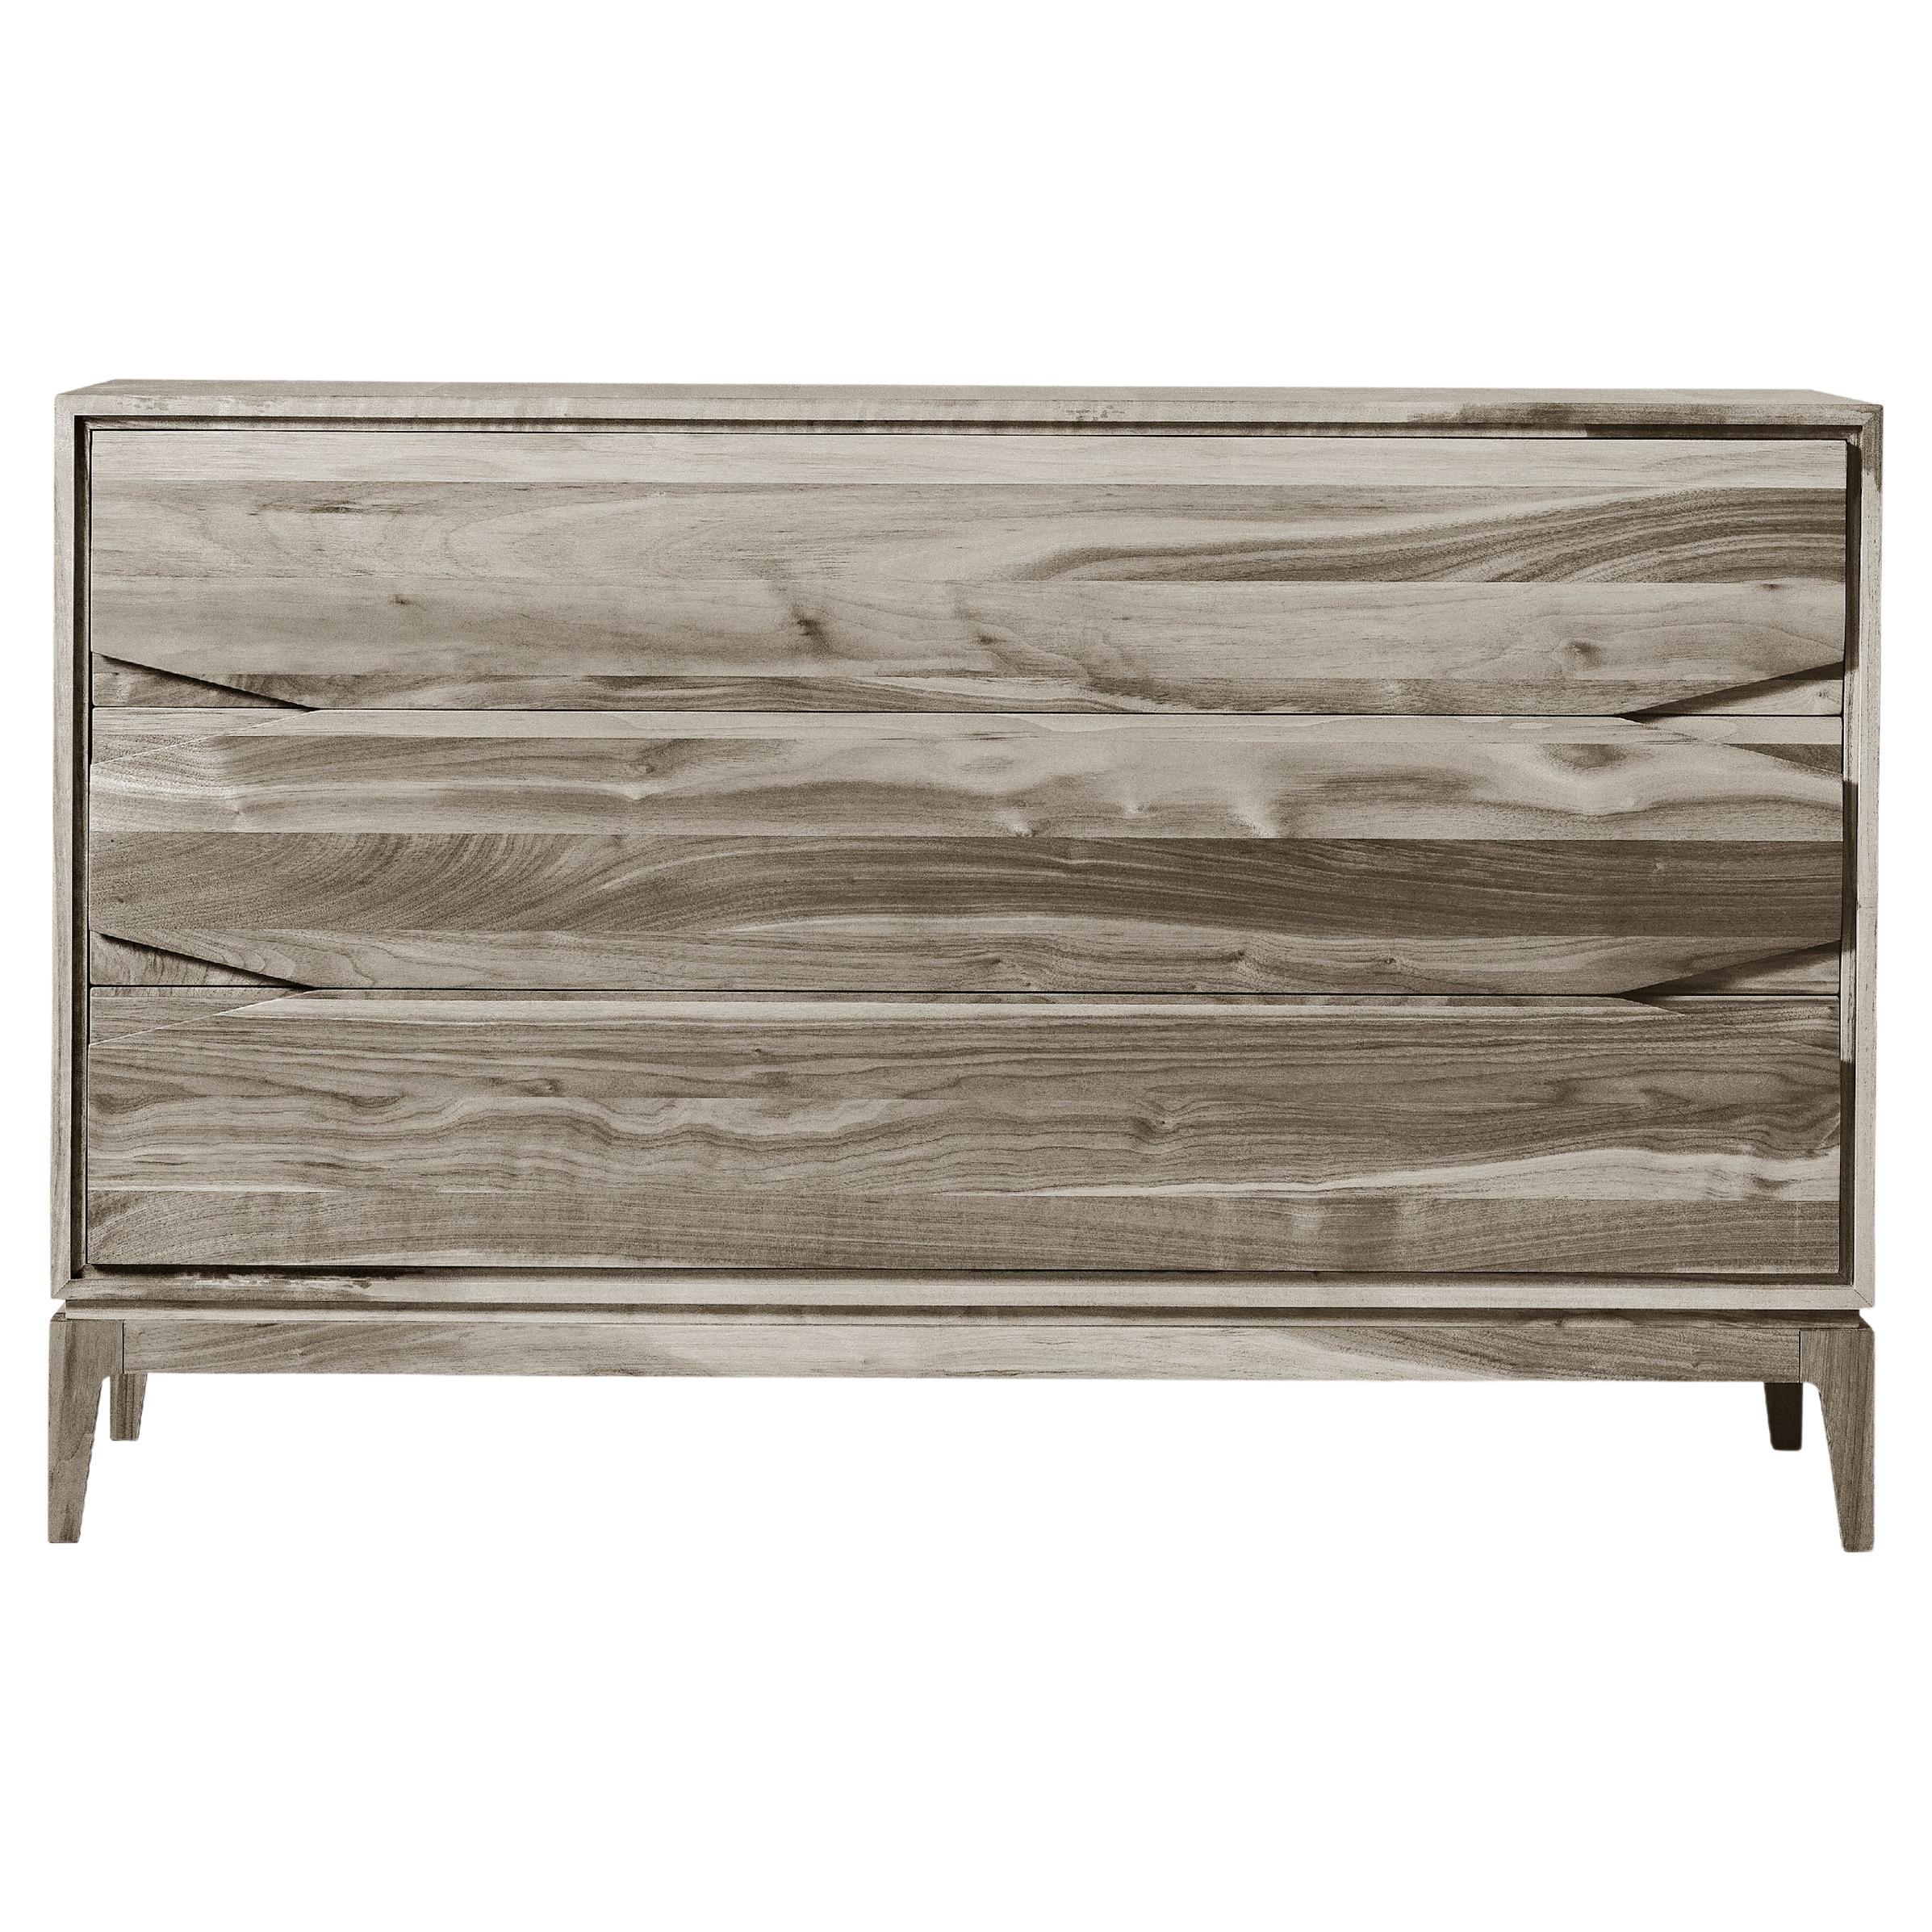 Base Solid Wood Dresser, Walnut in Hand-Made Natural Grey Finish, Contemporary